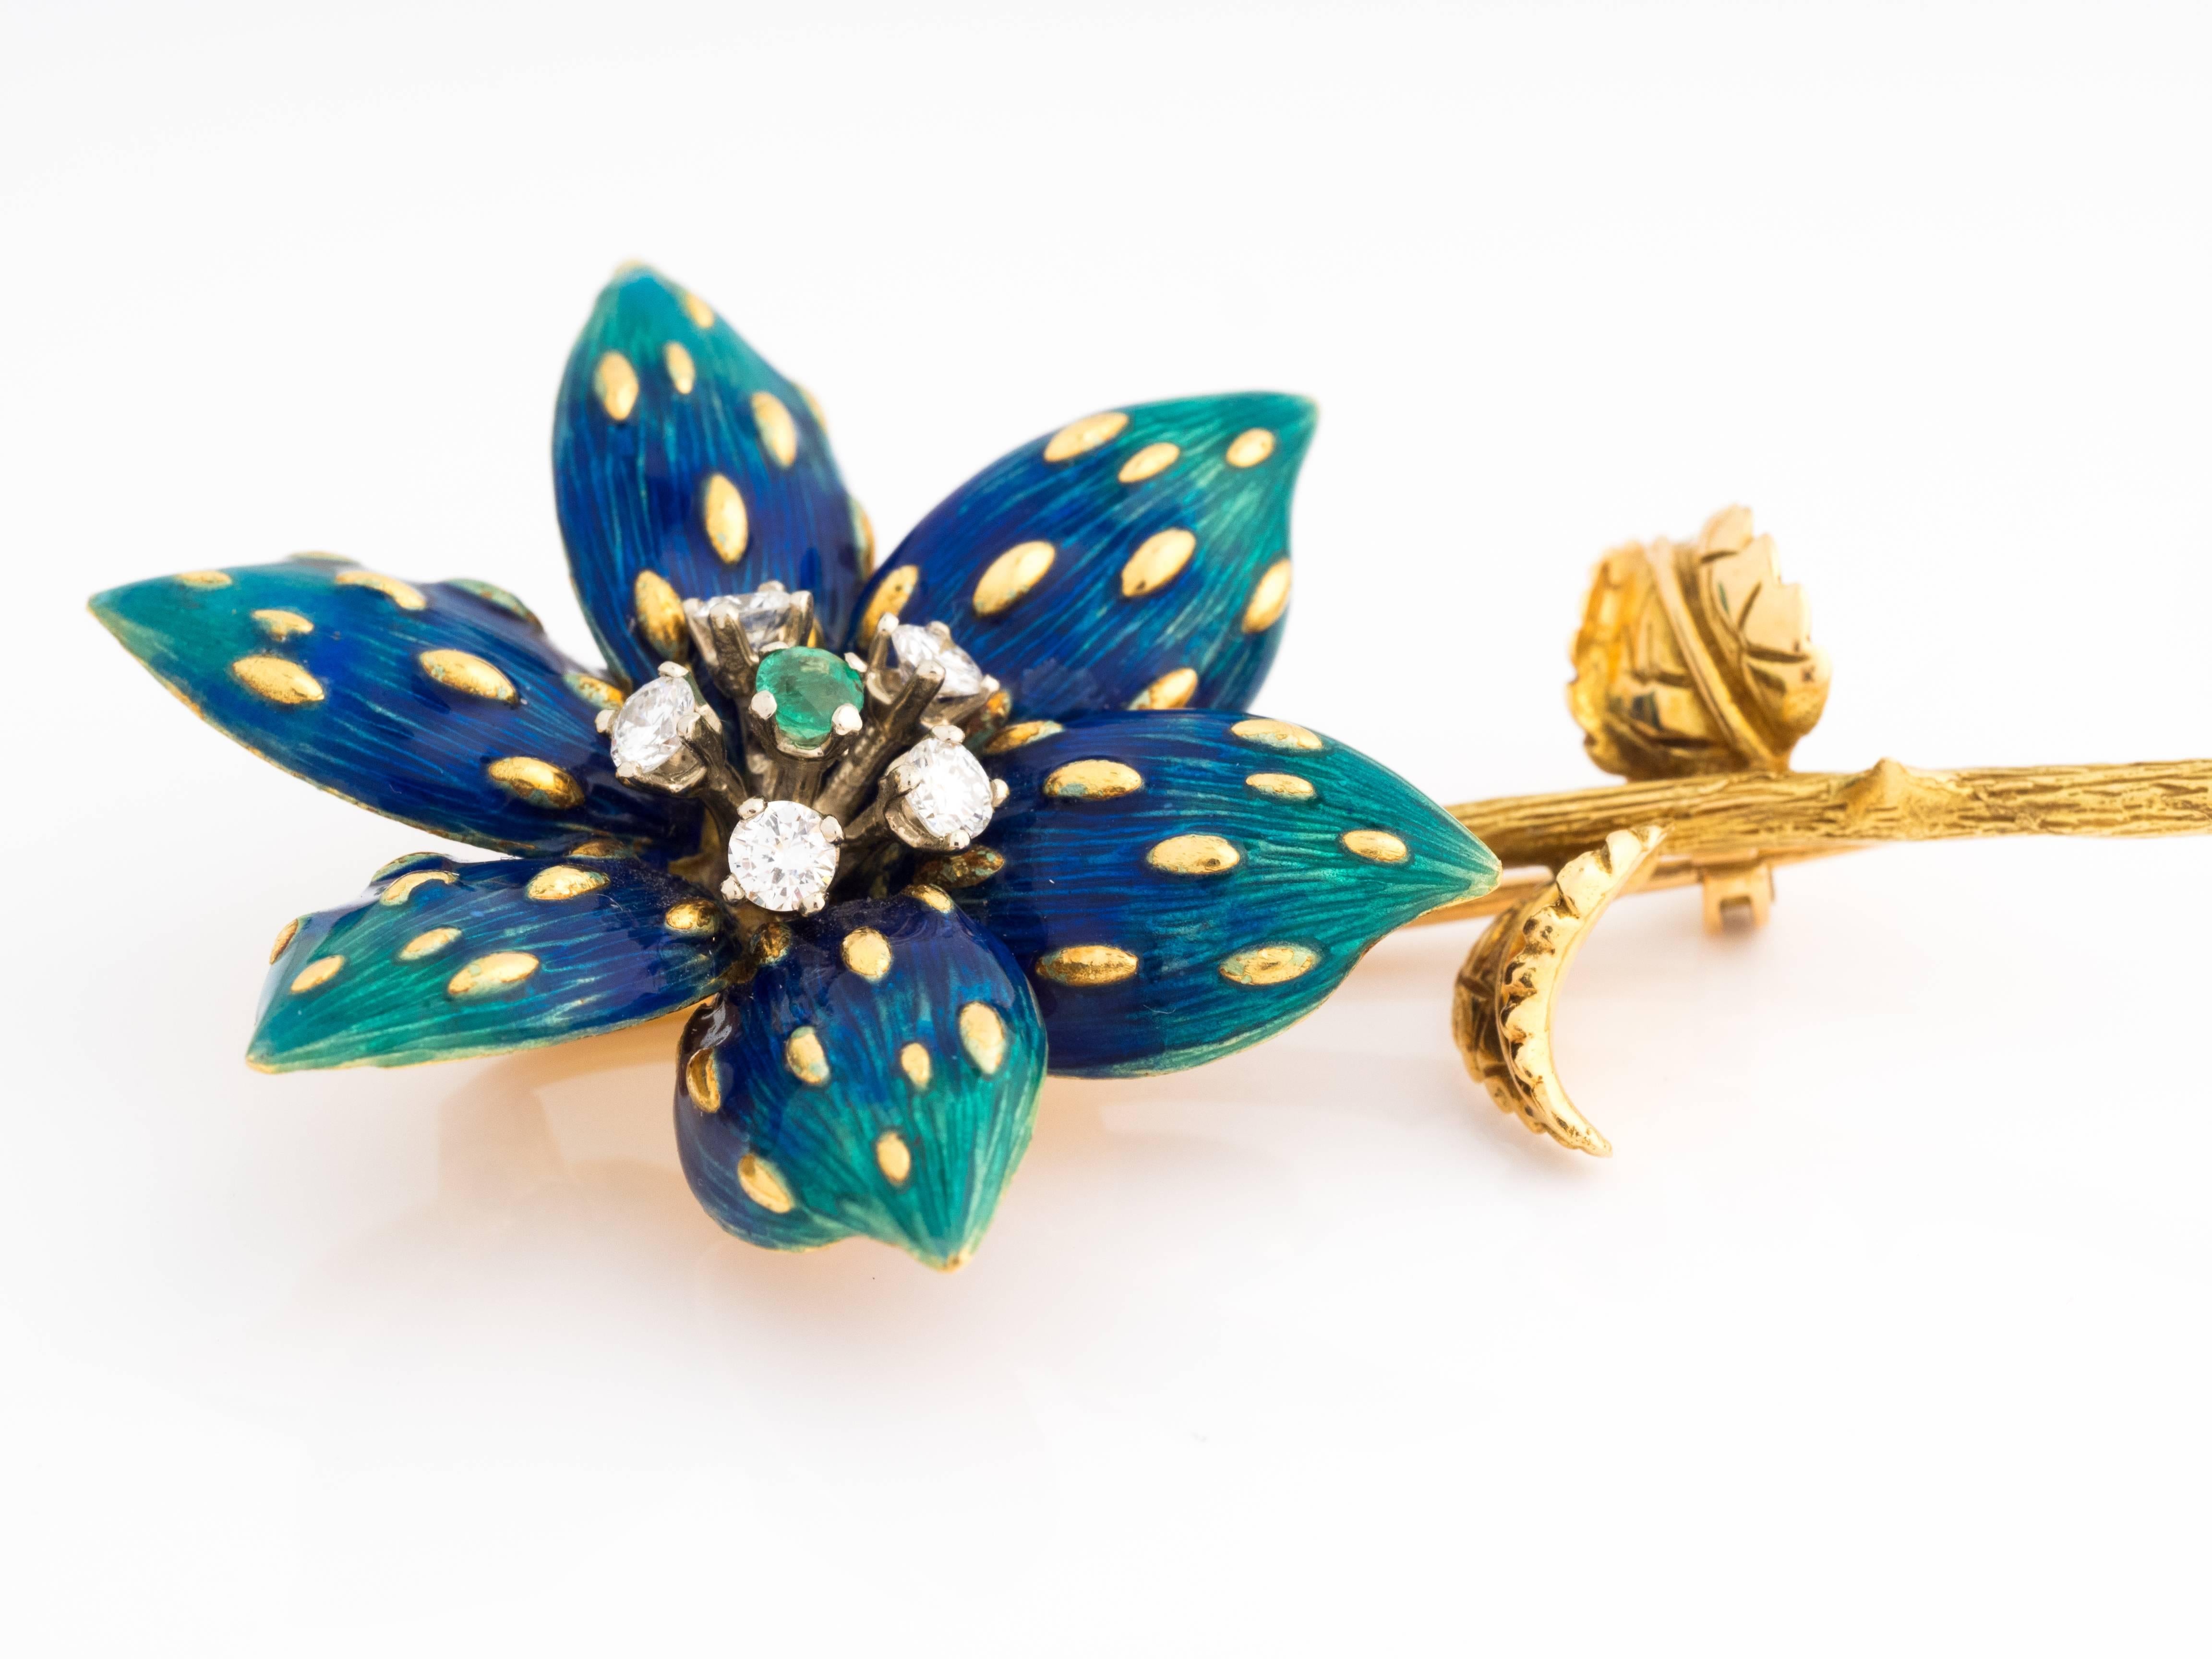 Exquisite hand-made floral pin/brooch ft. intricate enamel work reflecting deep blue hues to lighter green hues. The pin has raised yellow gold ridges throughout the petals in a uniform pattern. The center of the flower features five diamonds in a